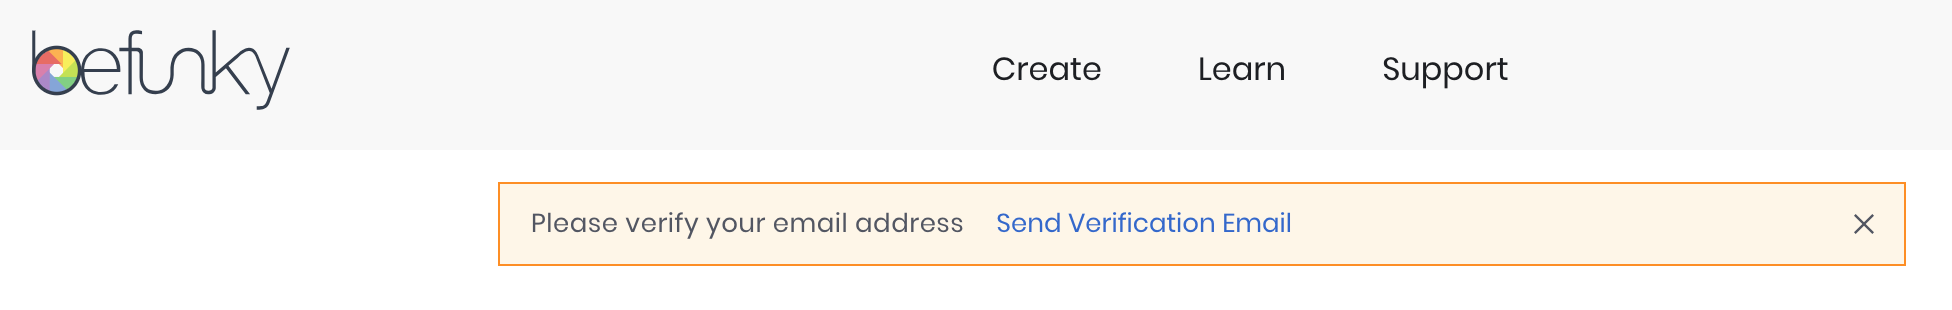 Verification email example